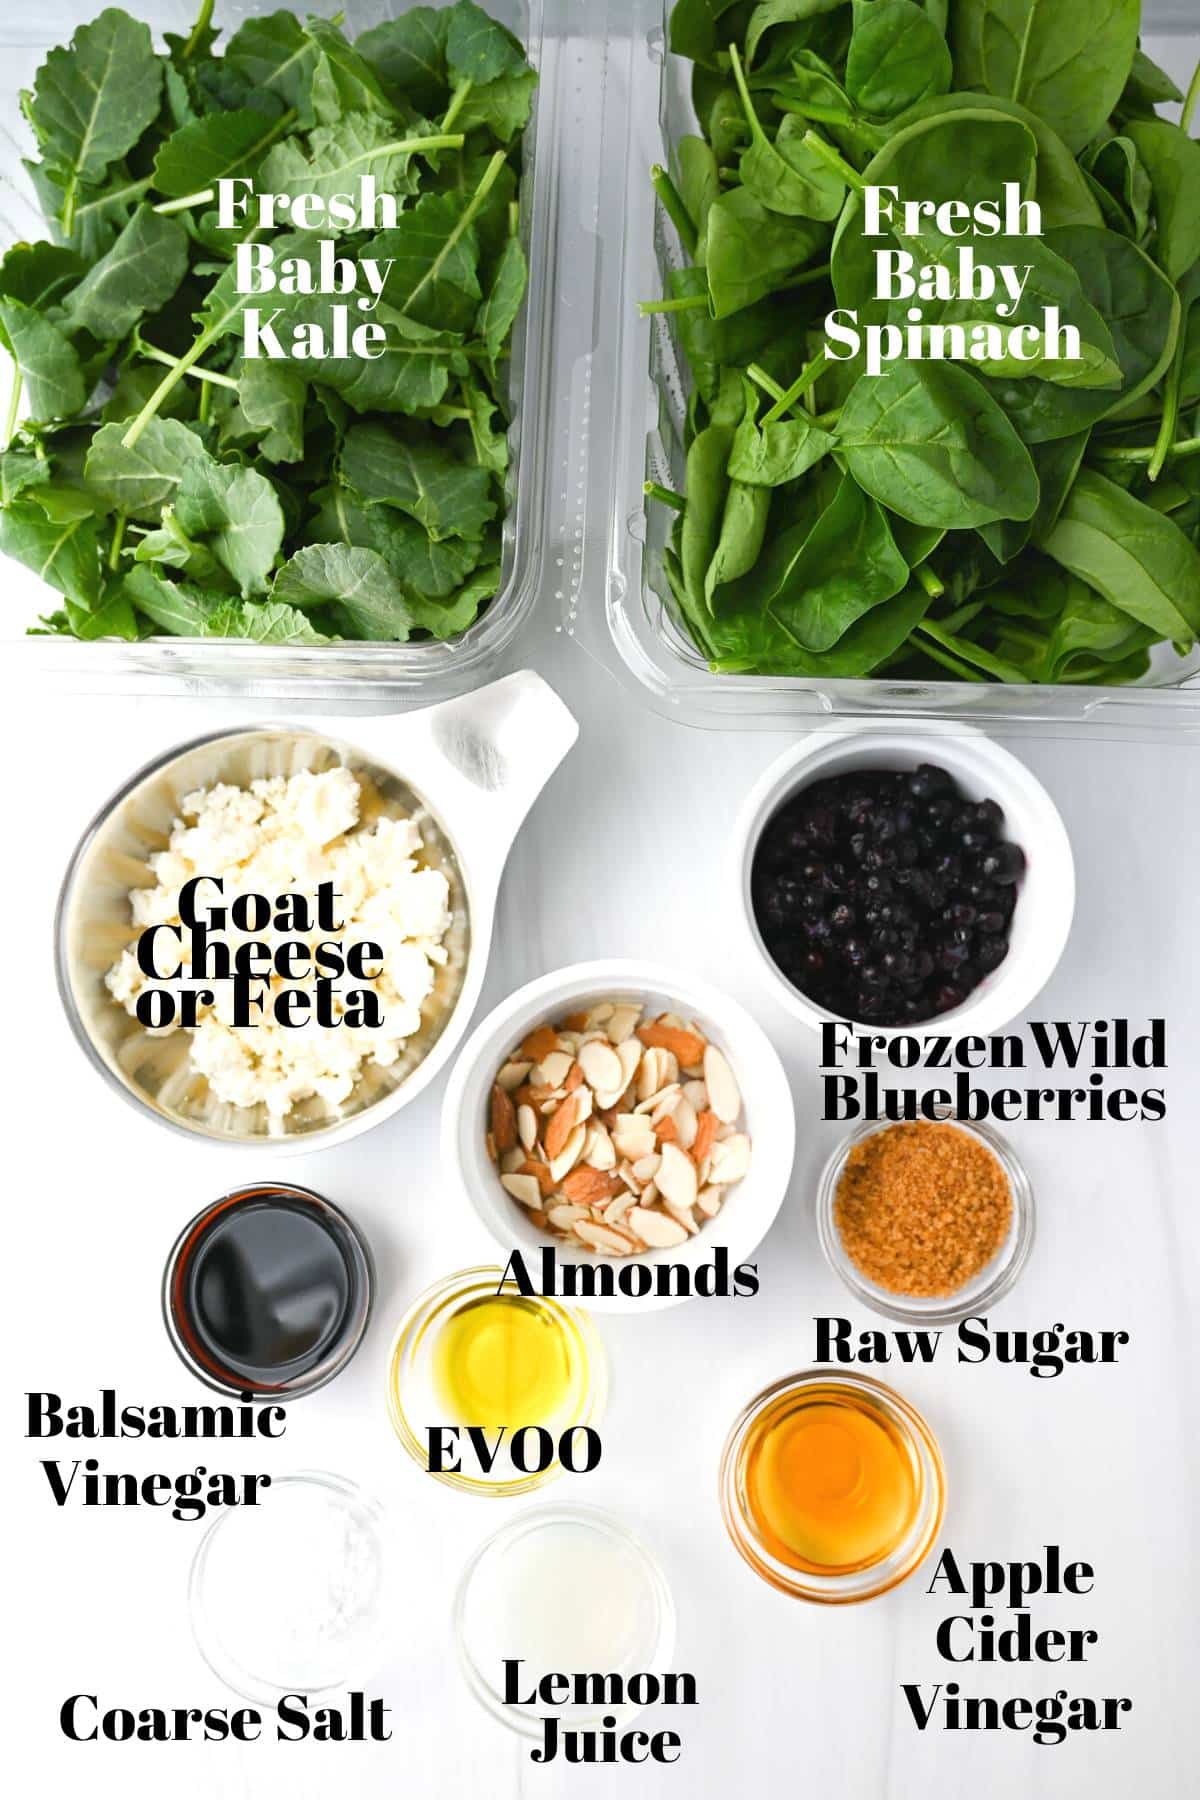 ingredients for kale and spinach salad measured out into containers on a white counter